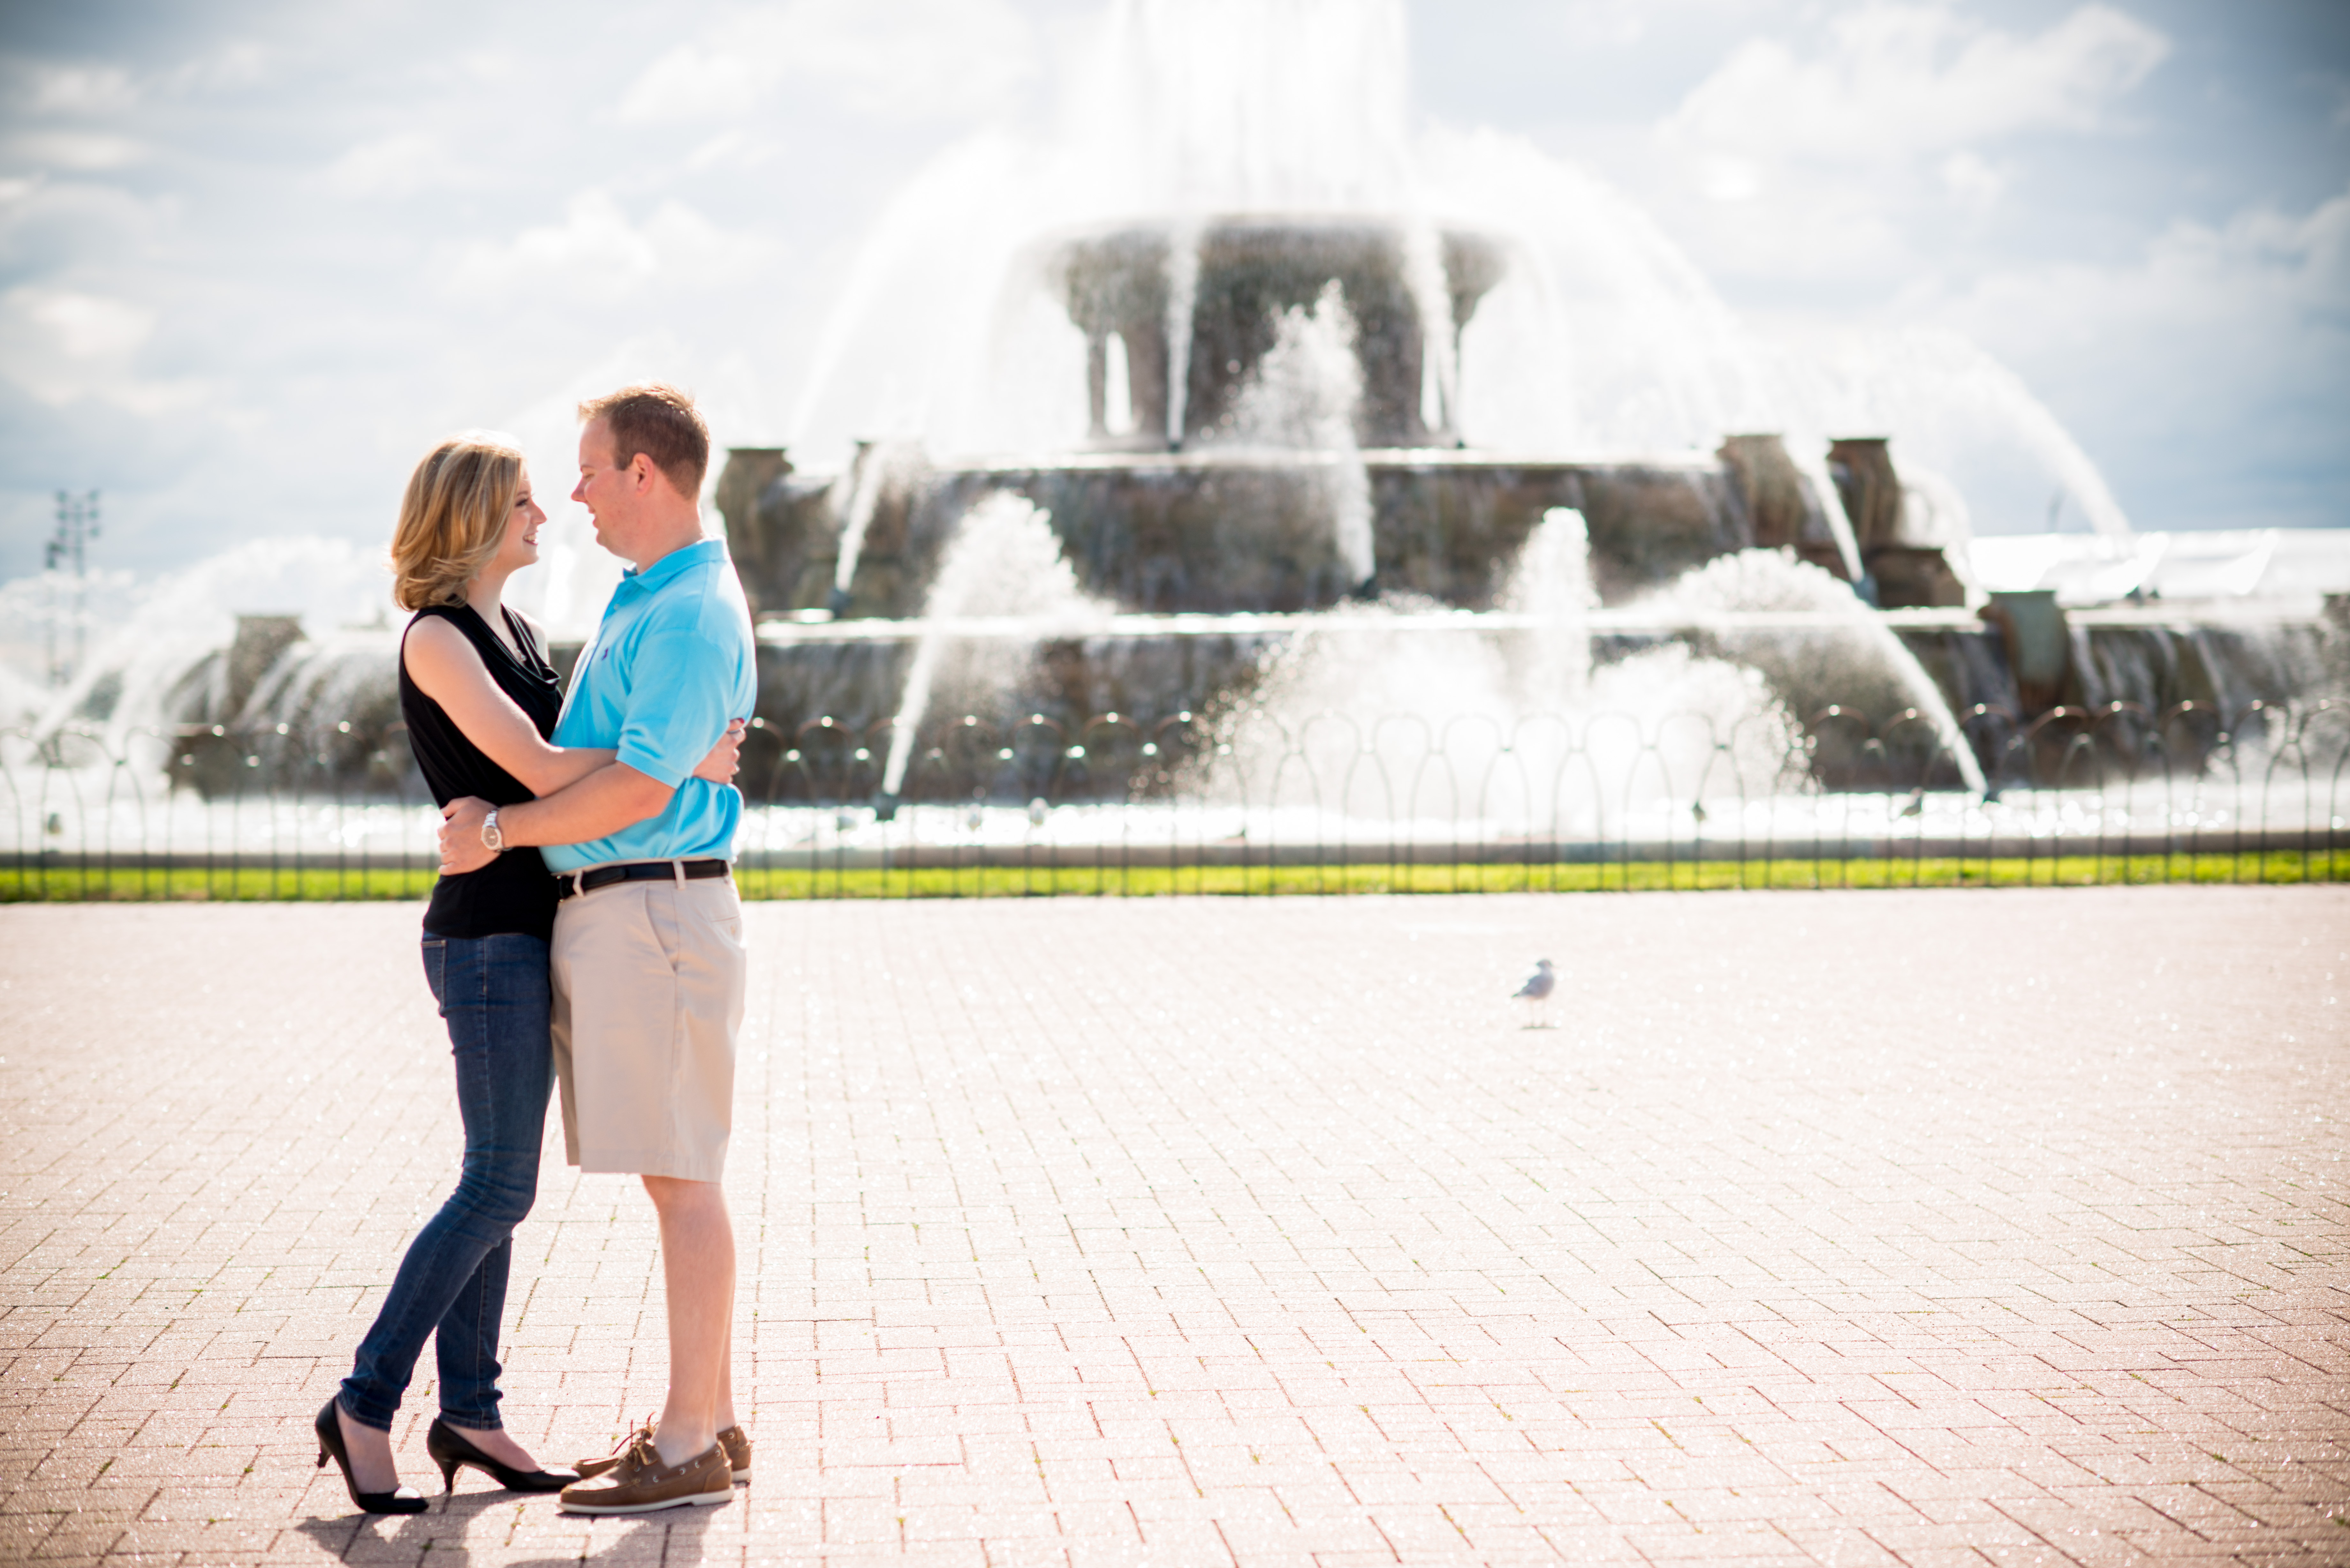 chicago downtown surprised engagement proposal